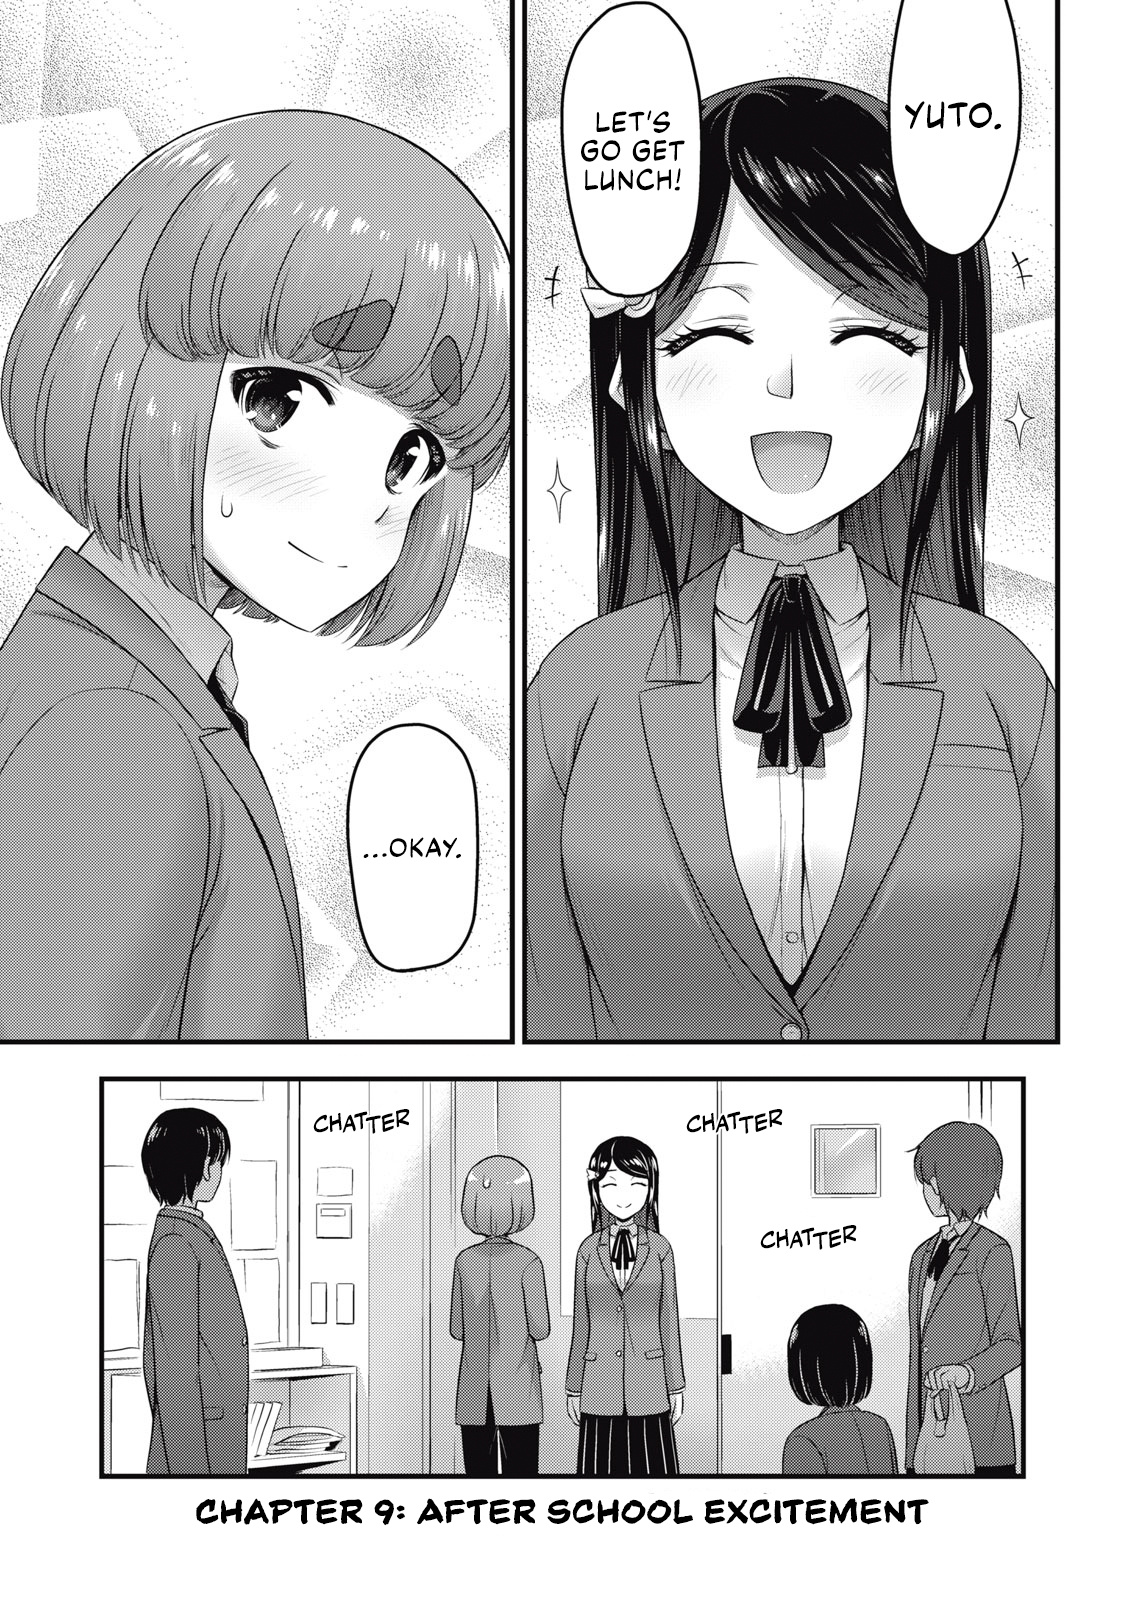 Queen's Seed Vol.2 Chapter 9: After School Excitement - Picture 2